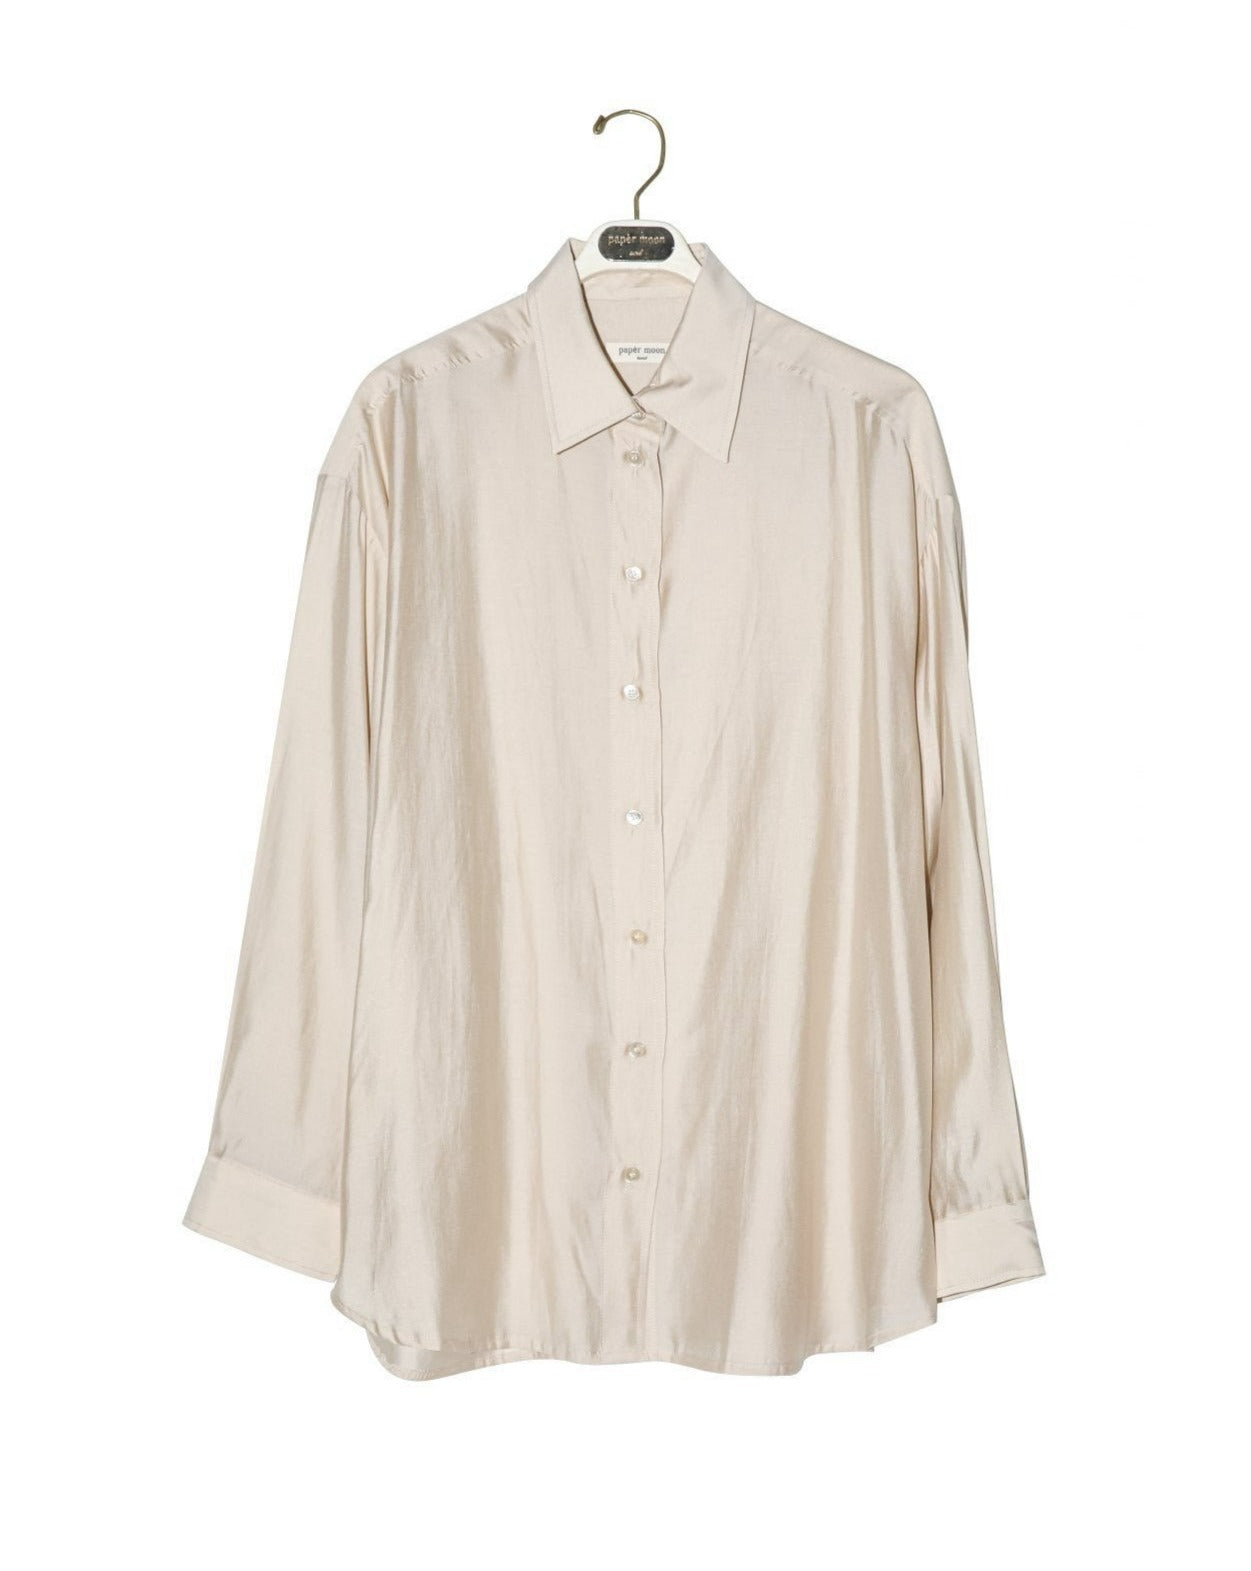 【PAPERMOON 페이퍼 문】SS / Sheer Silky Classic Button Down Shirt